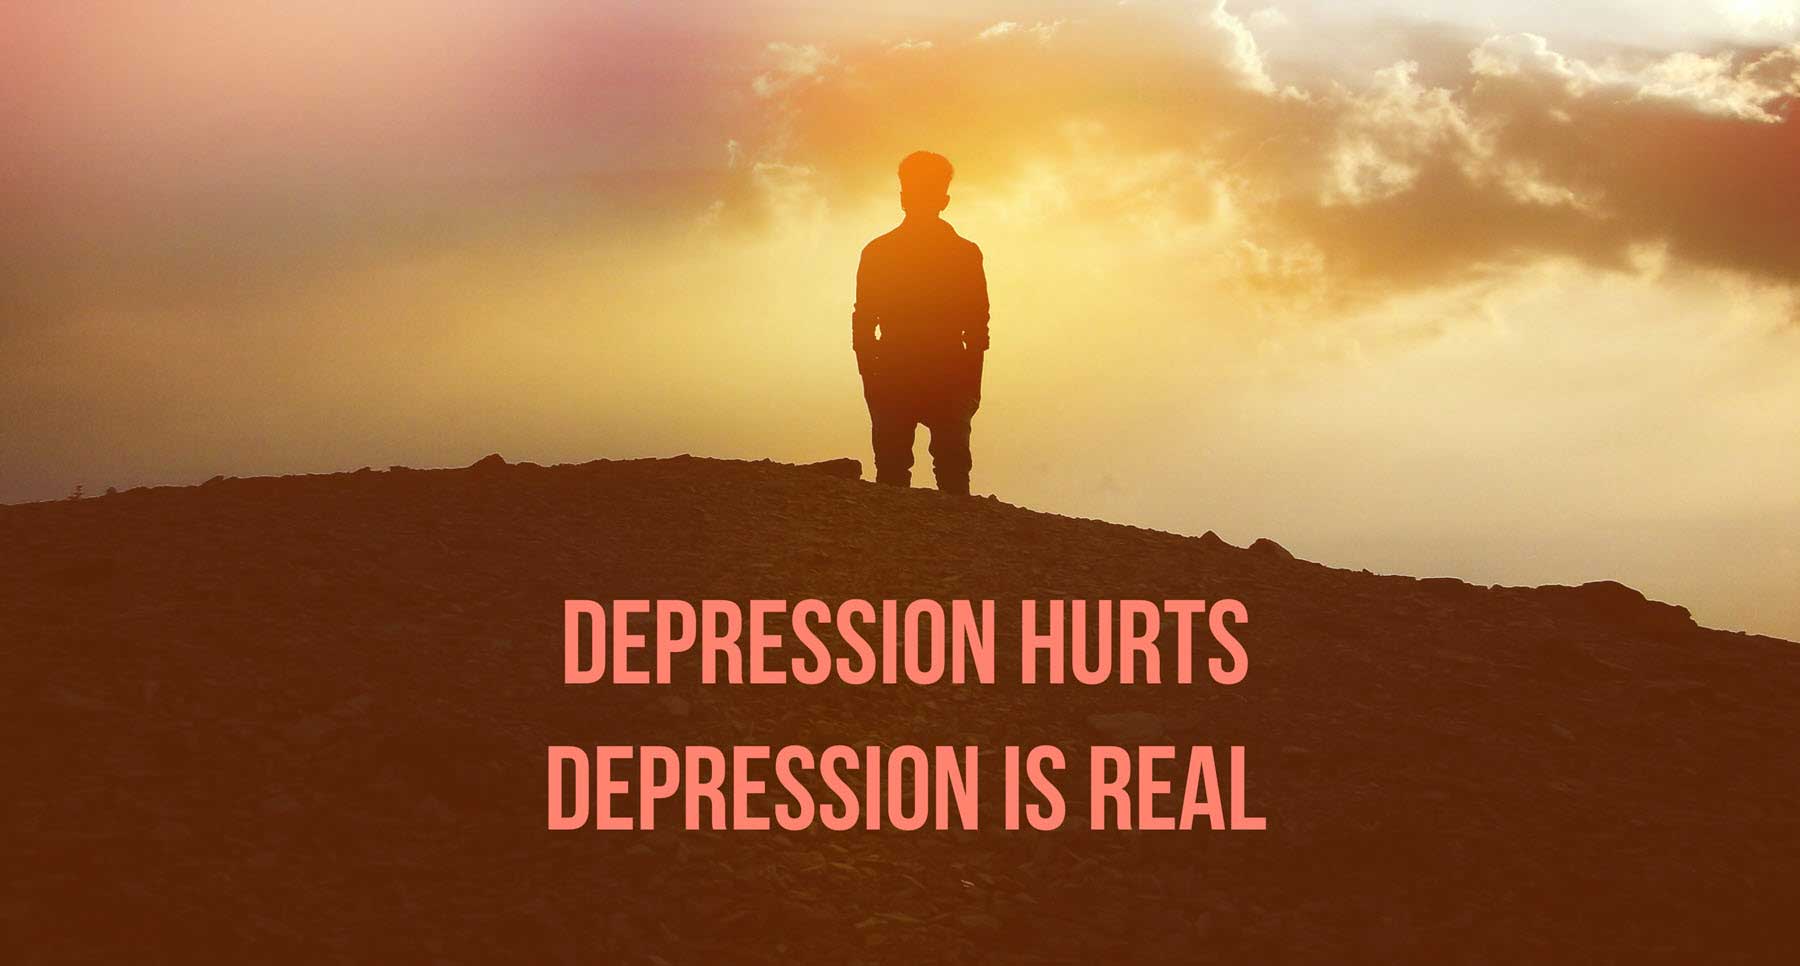 Depression-Hurts-Depression-is-Real-Signs-Symptoms-and-Tips-to-Overcome-Depression-from-TheHopeLine-